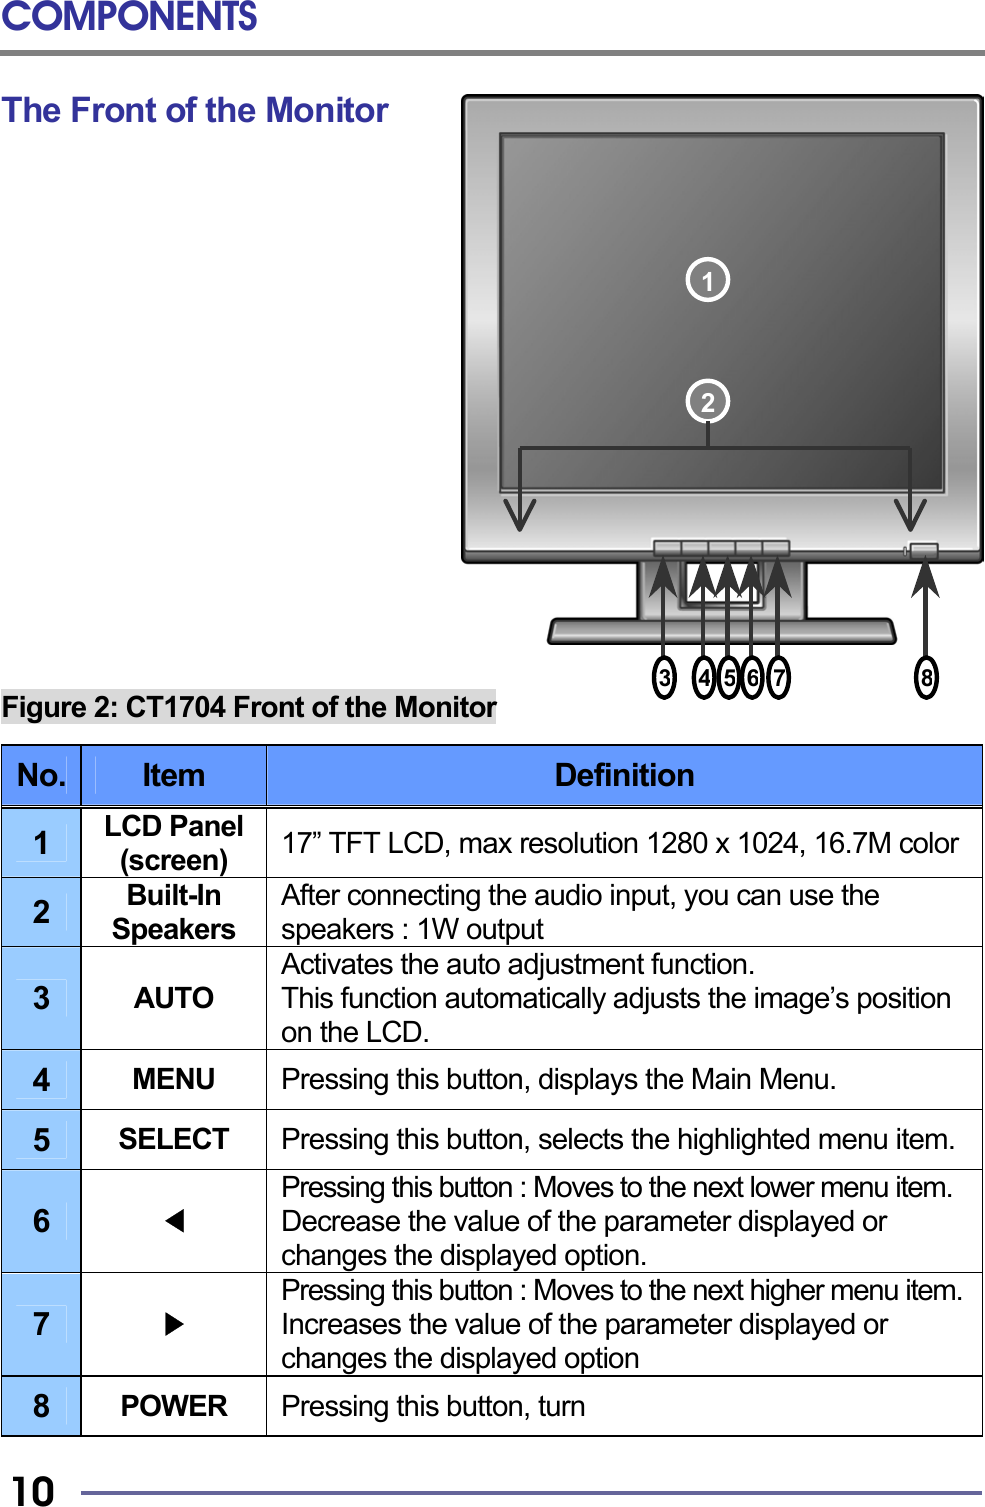 COMPONENTS   10 The Front of the Monitor                 Figure 2: CT1704 Front of the Monitor  No.  Item  Definition 1  LCD Panel (screen)  17” TFT LCD, max resolution 1280 x 1024, 16.7M color2  Built-In Speakers After connecting the audio input, you can use the speakers : 1W output 3  AUTO Activates the auto adjustment function.   This function automatically adjusts the image’s position on the LCD. 4  MENU  Pressing this button, displays the Main Menu. 5  SELECT  Pressing this button, selects the highlighted menu item.6  ◀ Pressing this button : Moves to the next lower menu item. Decrease the value of the parameter displayed or changes the displayed option. 7  ▶ Pressing this button : Moves to the next higher menu item.Increases the value of the parameter displayed or changes the displayed option   8  POWER  Pressing this button, turn 21375468